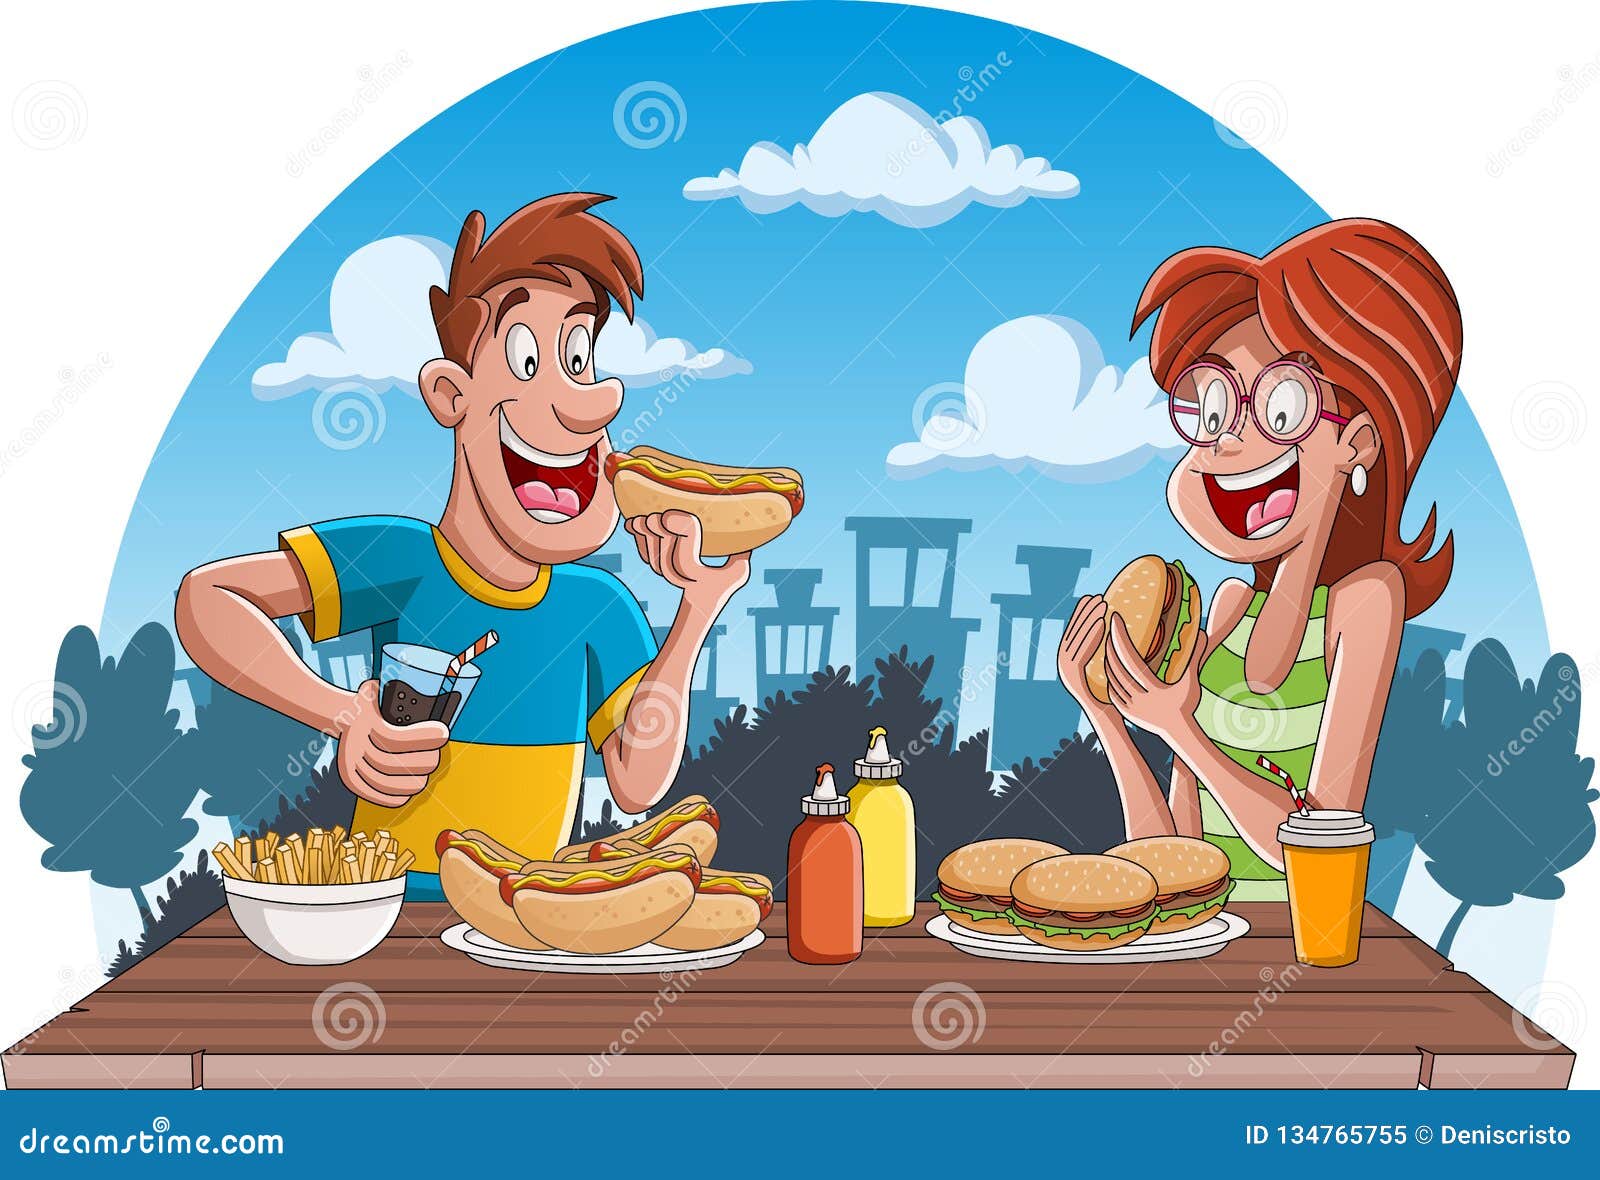 Couple of Cartoon People Eating Junk Food. Stock Vector - Illustration of  outdoors, girl: 134765755